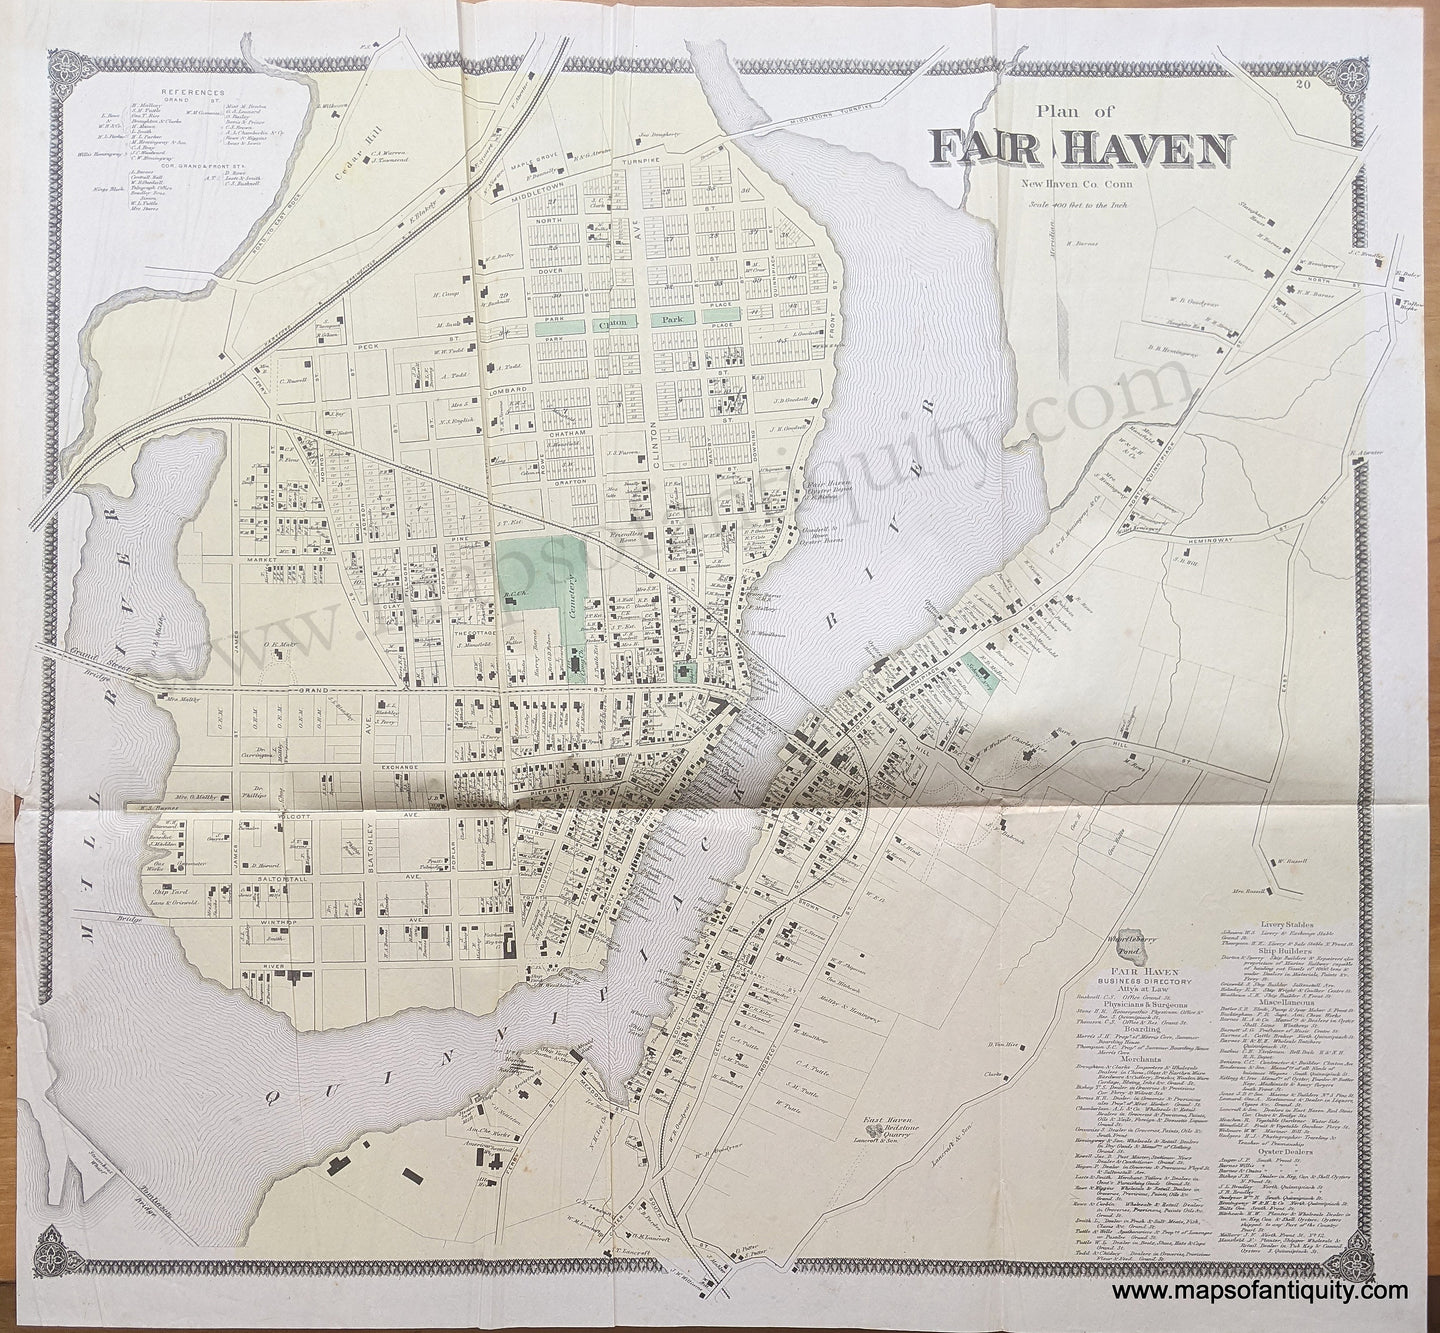 Genuine-Antique-Hand-Colored-Map-Plan-of-Fair-Haven-CT-1868-F.W.-Beers-Maps-Of-Antiquity-1800s-19th-century